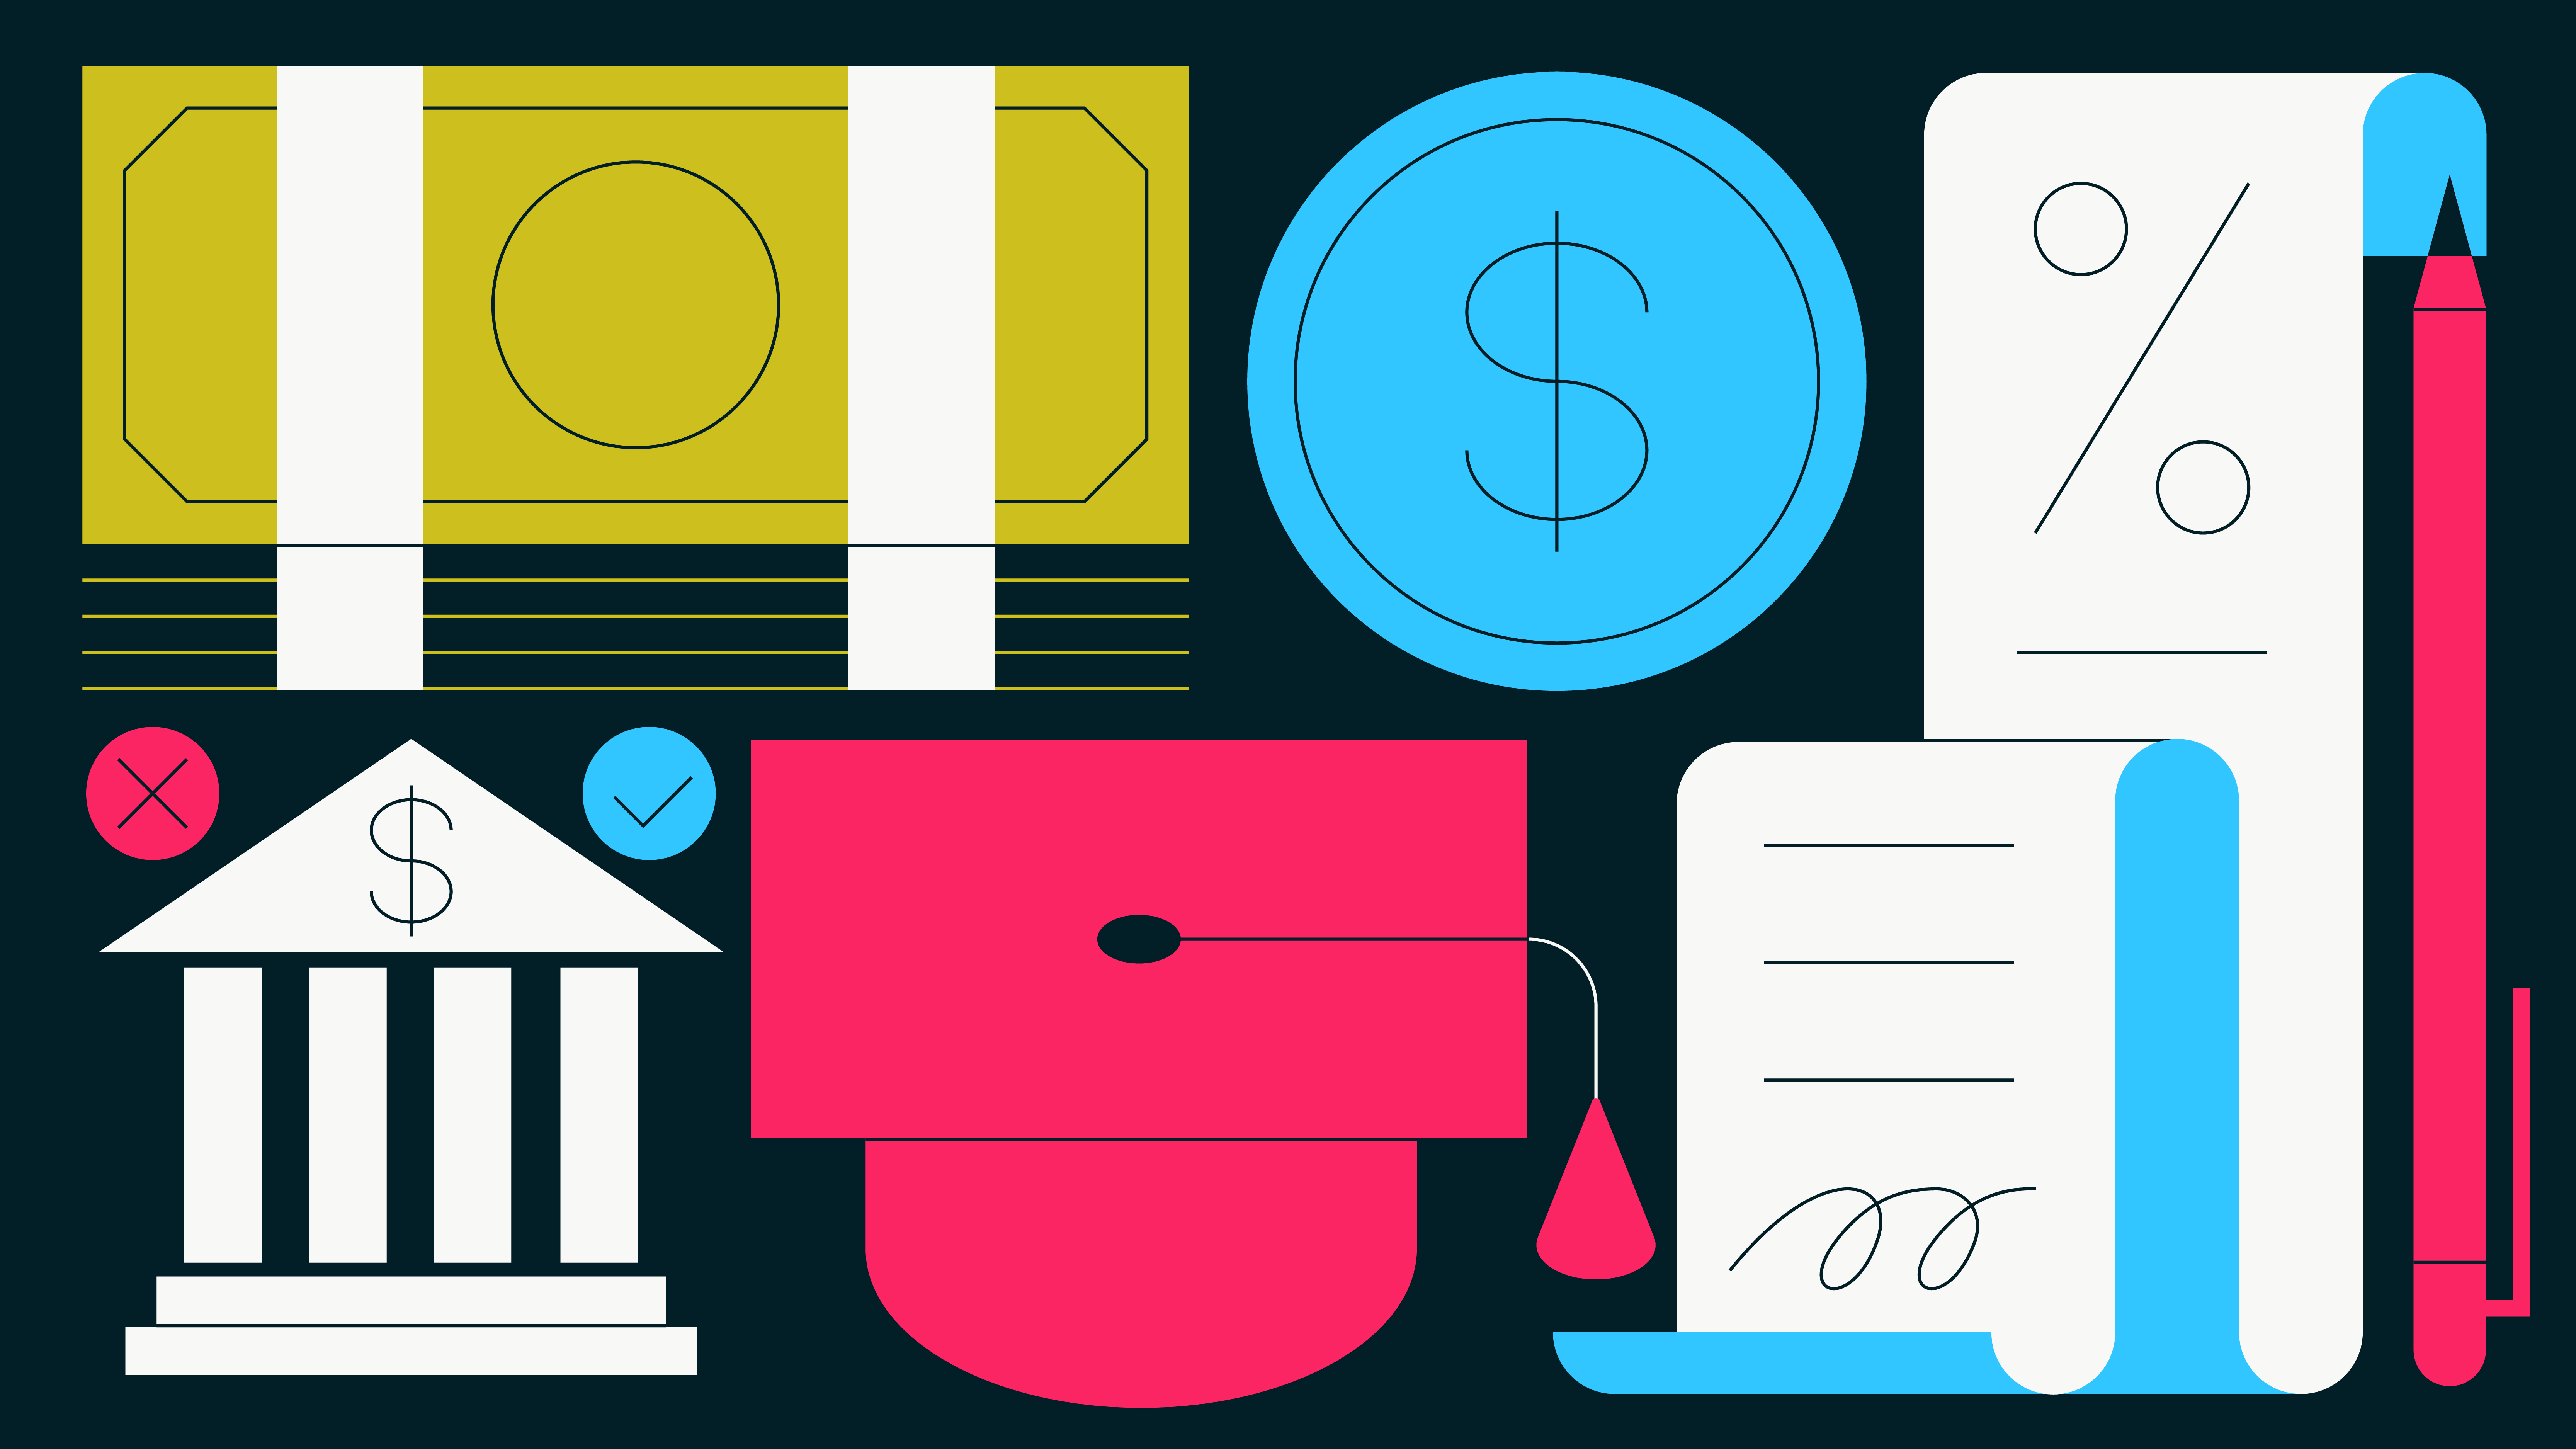 Flat illustrations of a golden dollar bill, a blue coin, a white bank facade with pillars, a pink graduation cap, and a long white receipt and pink pencil against a black background.